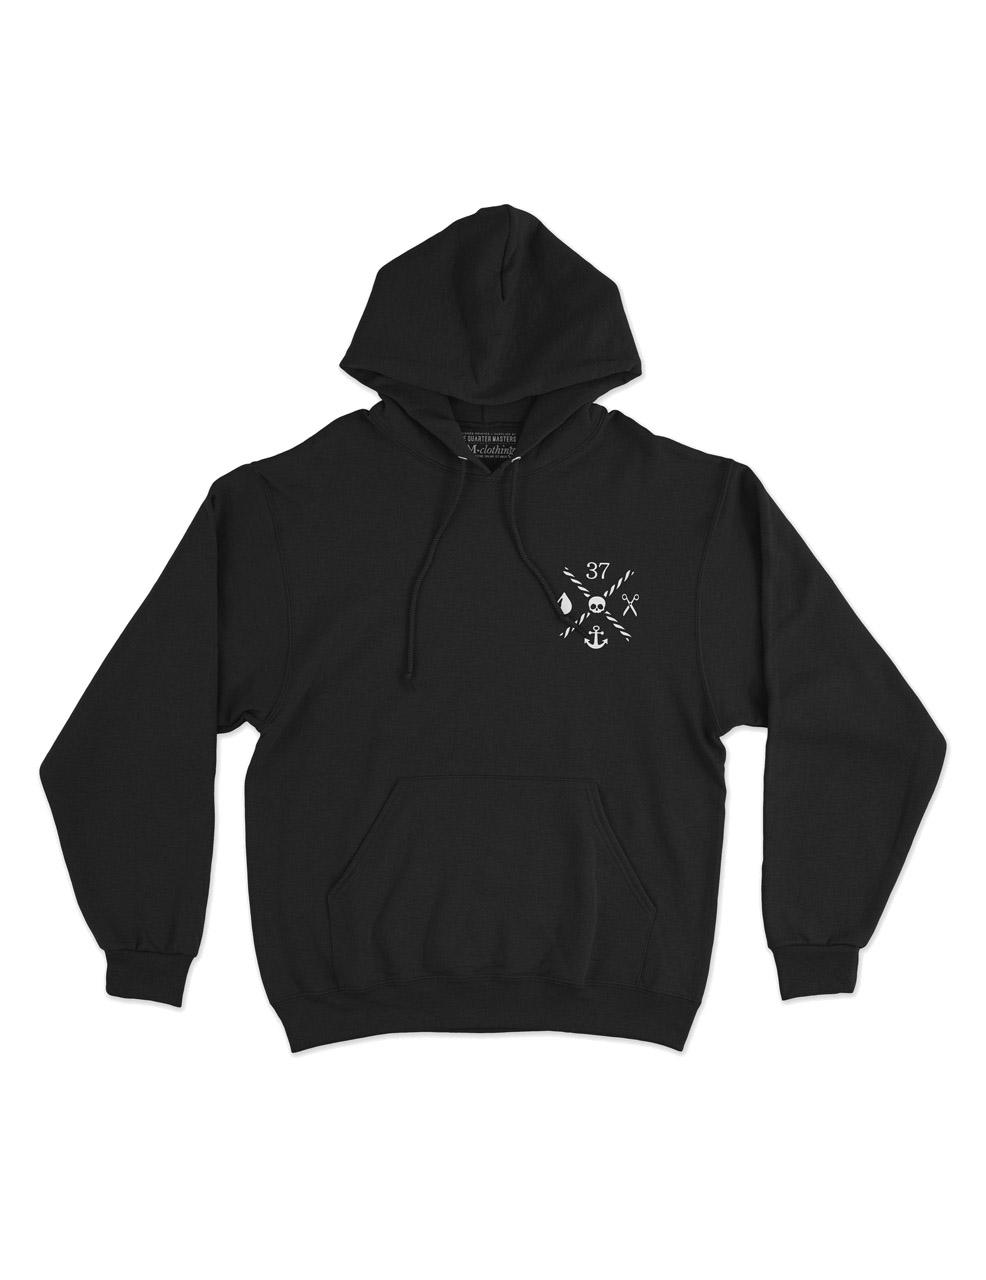 Unisex pullover hoodie — black (front view)